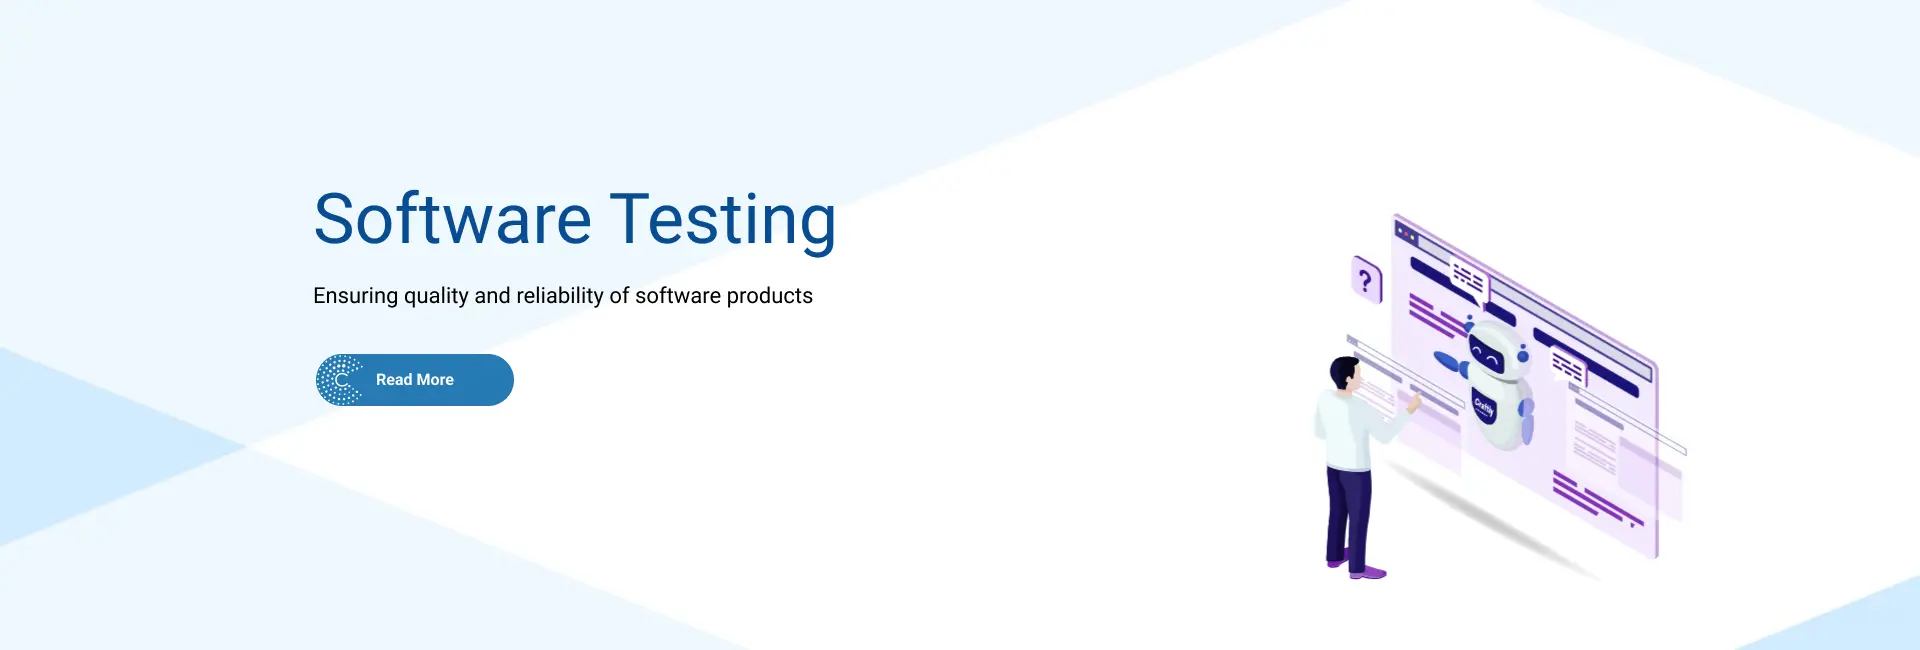 Software Testing - Ensuring quality and reliability of software products